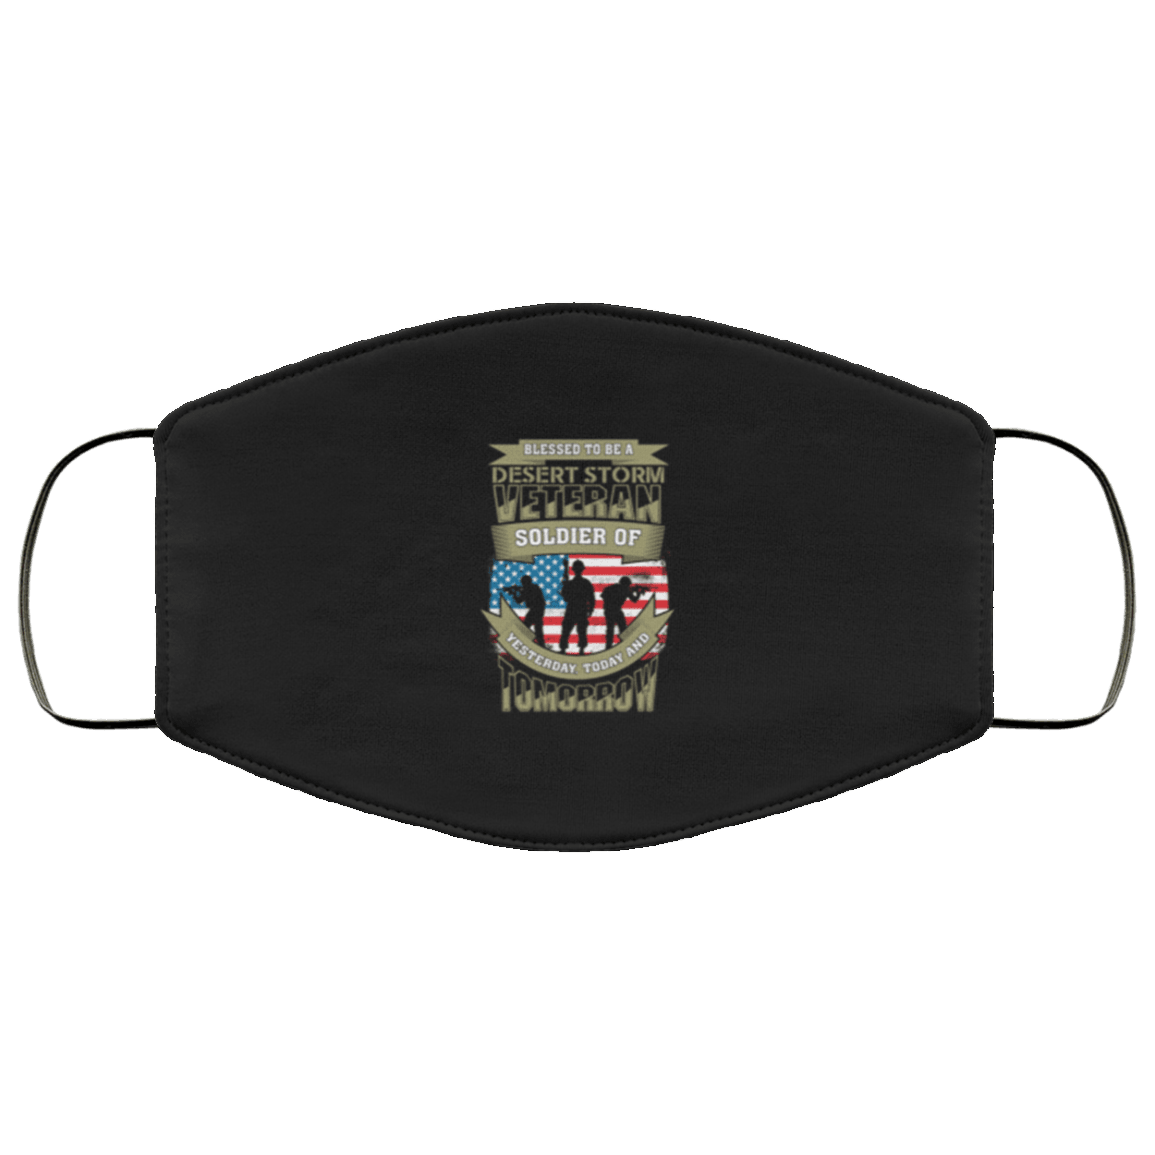 Designs by MyUtopia Shout Out:Blessed to be a Desert Storm Veteran Soldier of Yesterday Today and Tomorrow Adult Fabric Face Mask with Elastic Ear Loops,2 Layers Fabric Face Mask / Black / Adult,Fabric Face Mask